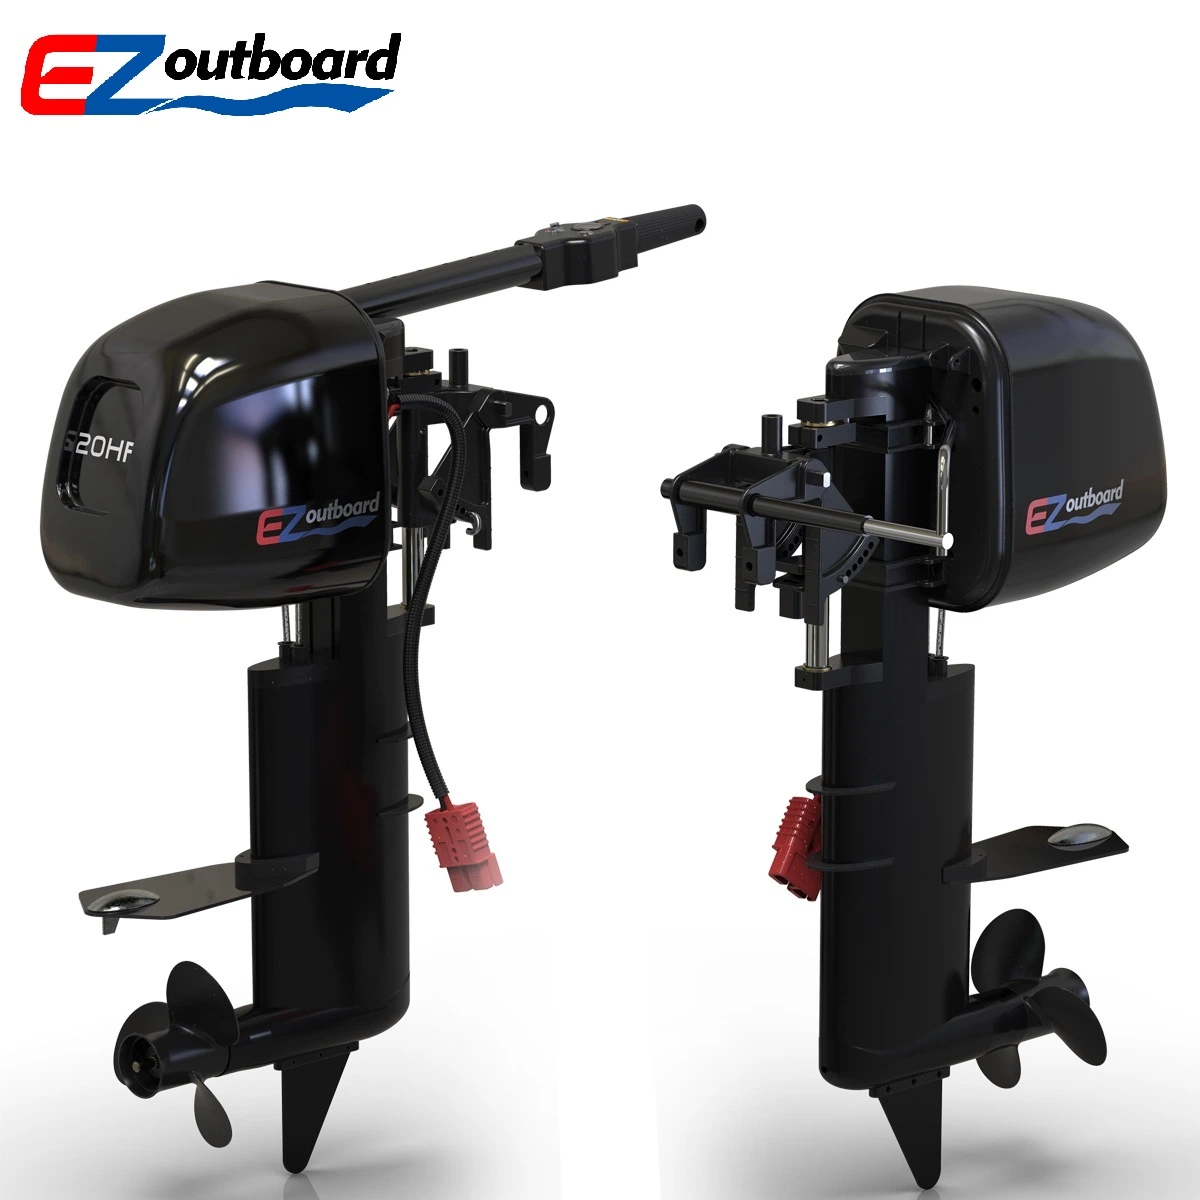 Remote and Tiller control New EZ Outboard sport version 6HP 10HP 20HP Electric Outboard Motor for Boat